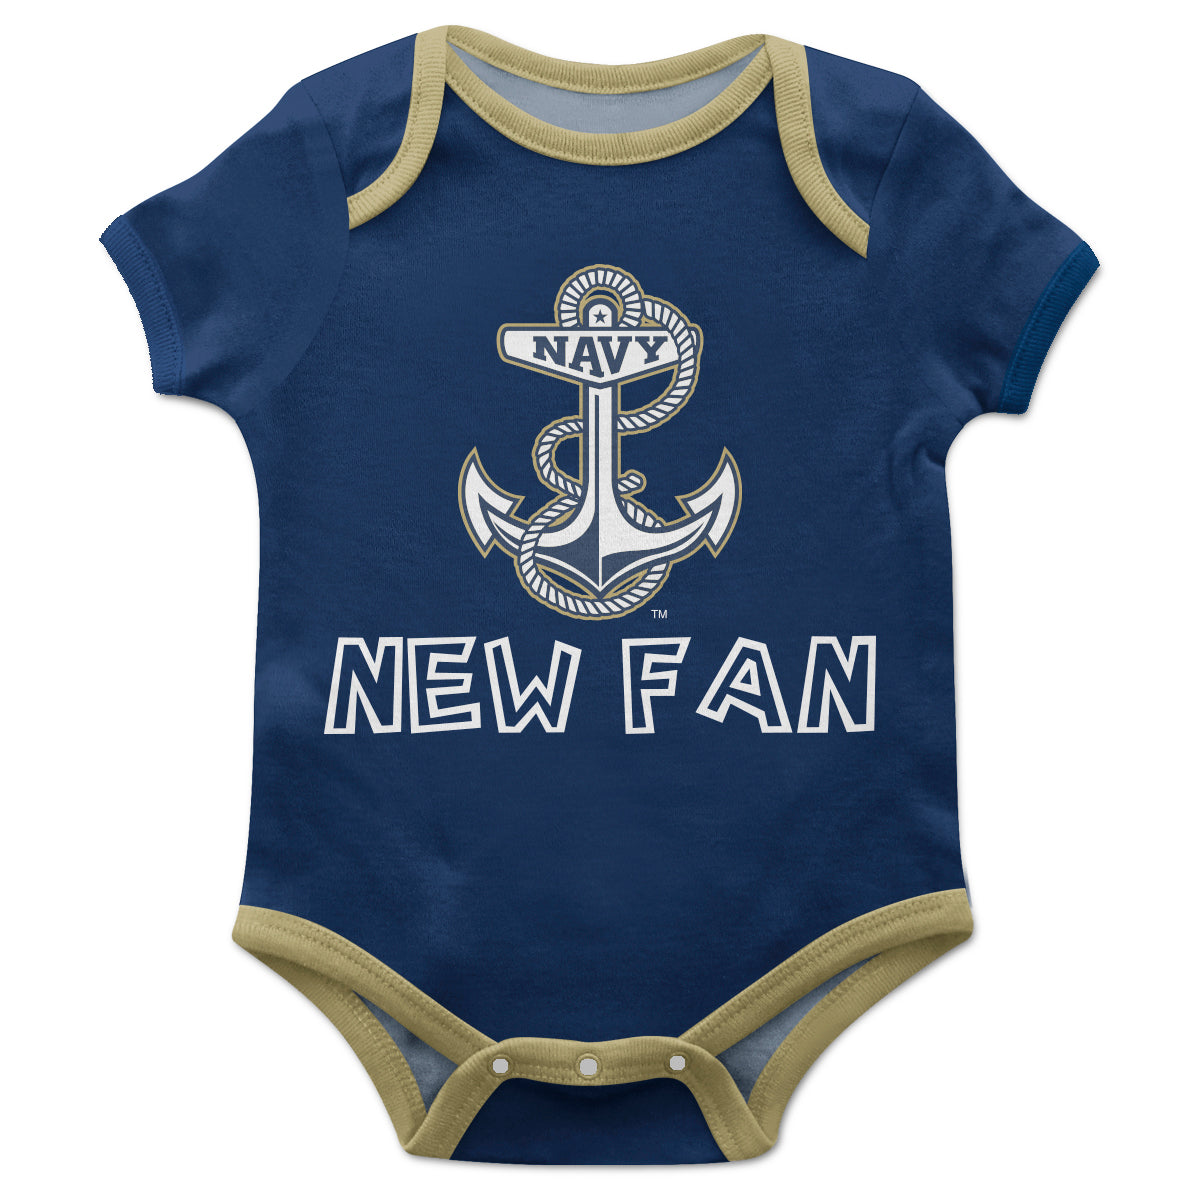 United State Naval Academy Solid Navy New Fan Boys One Piece Jumpsuit by Vive La Fete